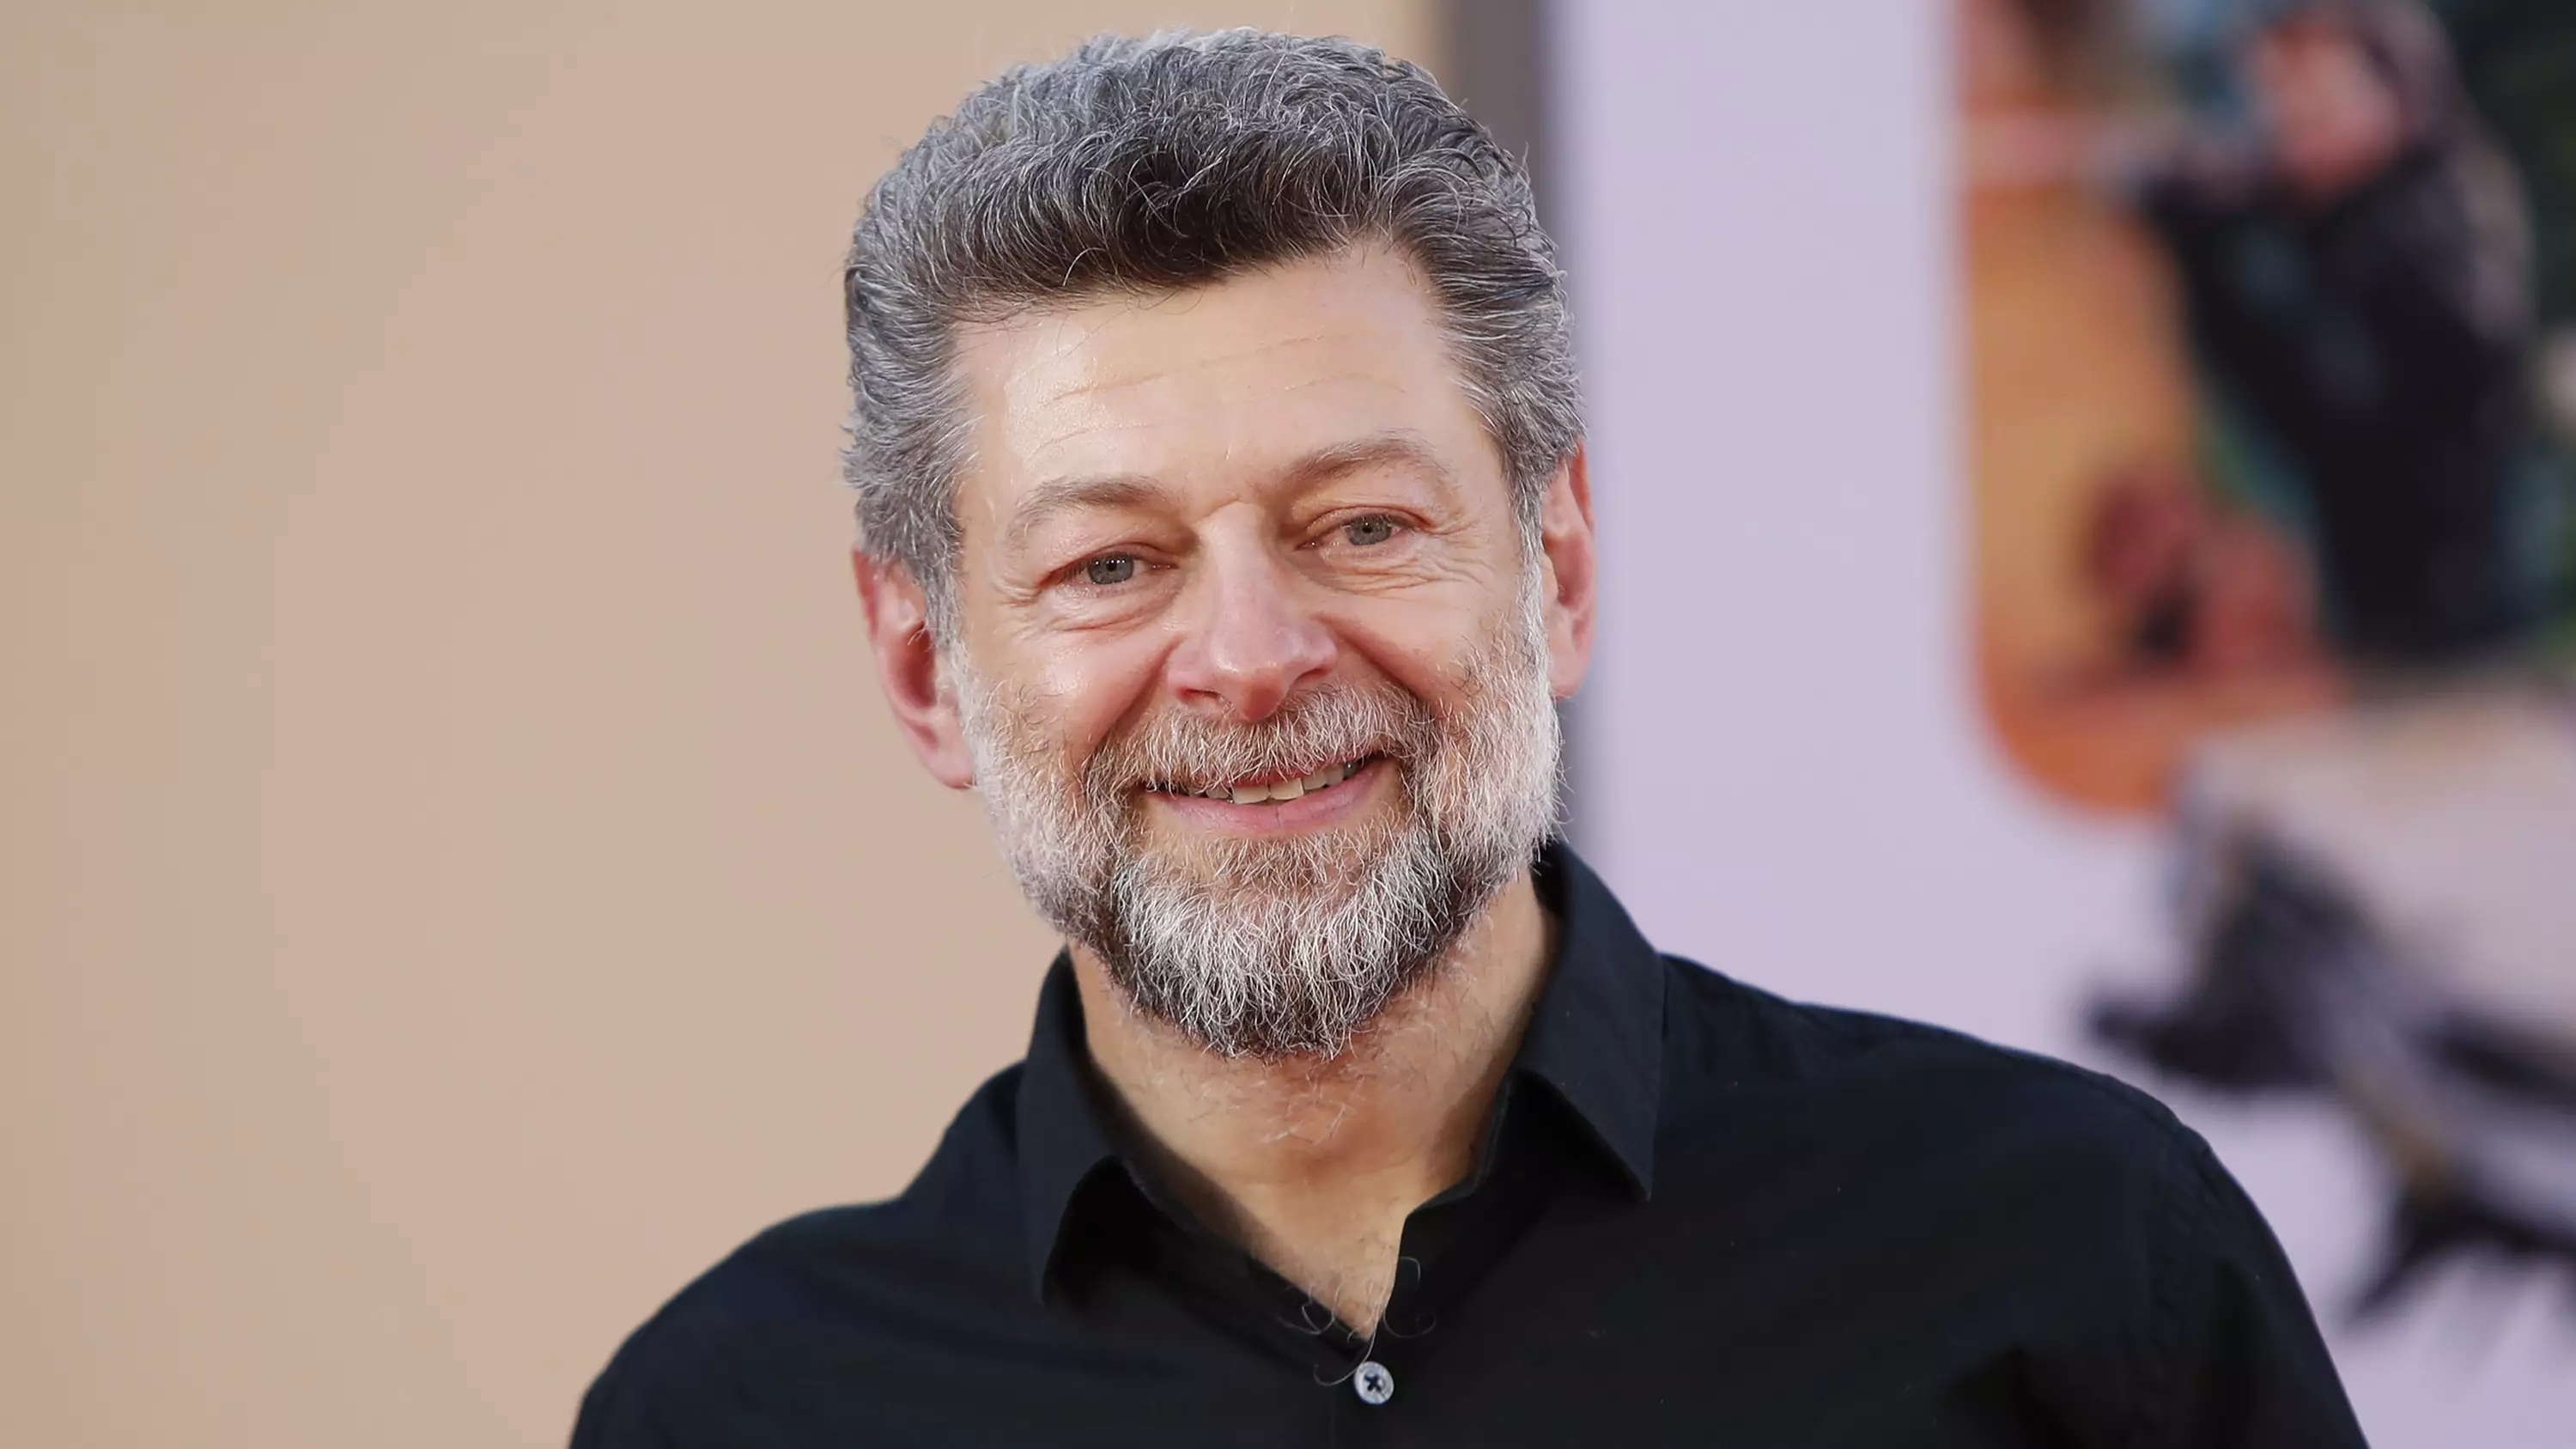 Andy Serkis Raises More Than £290,000 With Live Reading Of The Hobbit